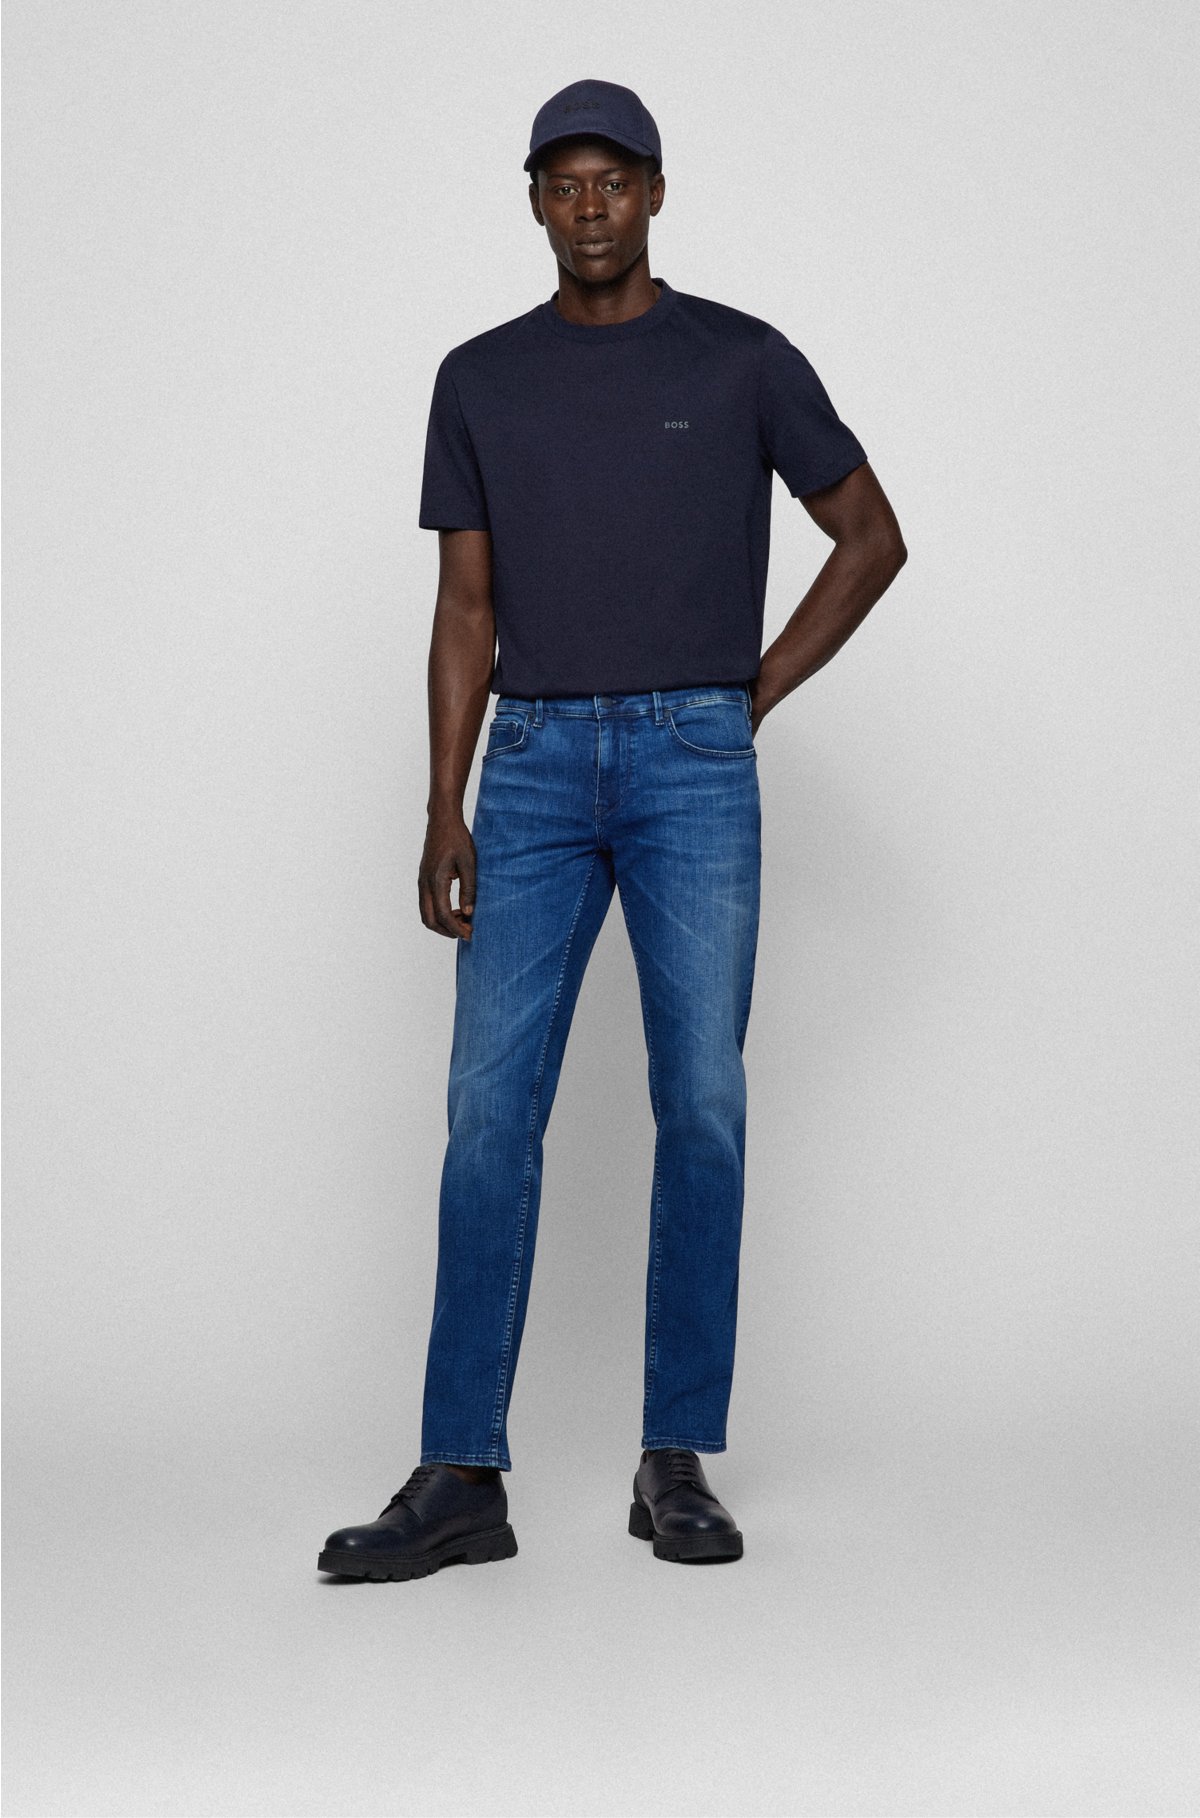 BOSS   Extra slim fit jeans in blue supreme movement denim